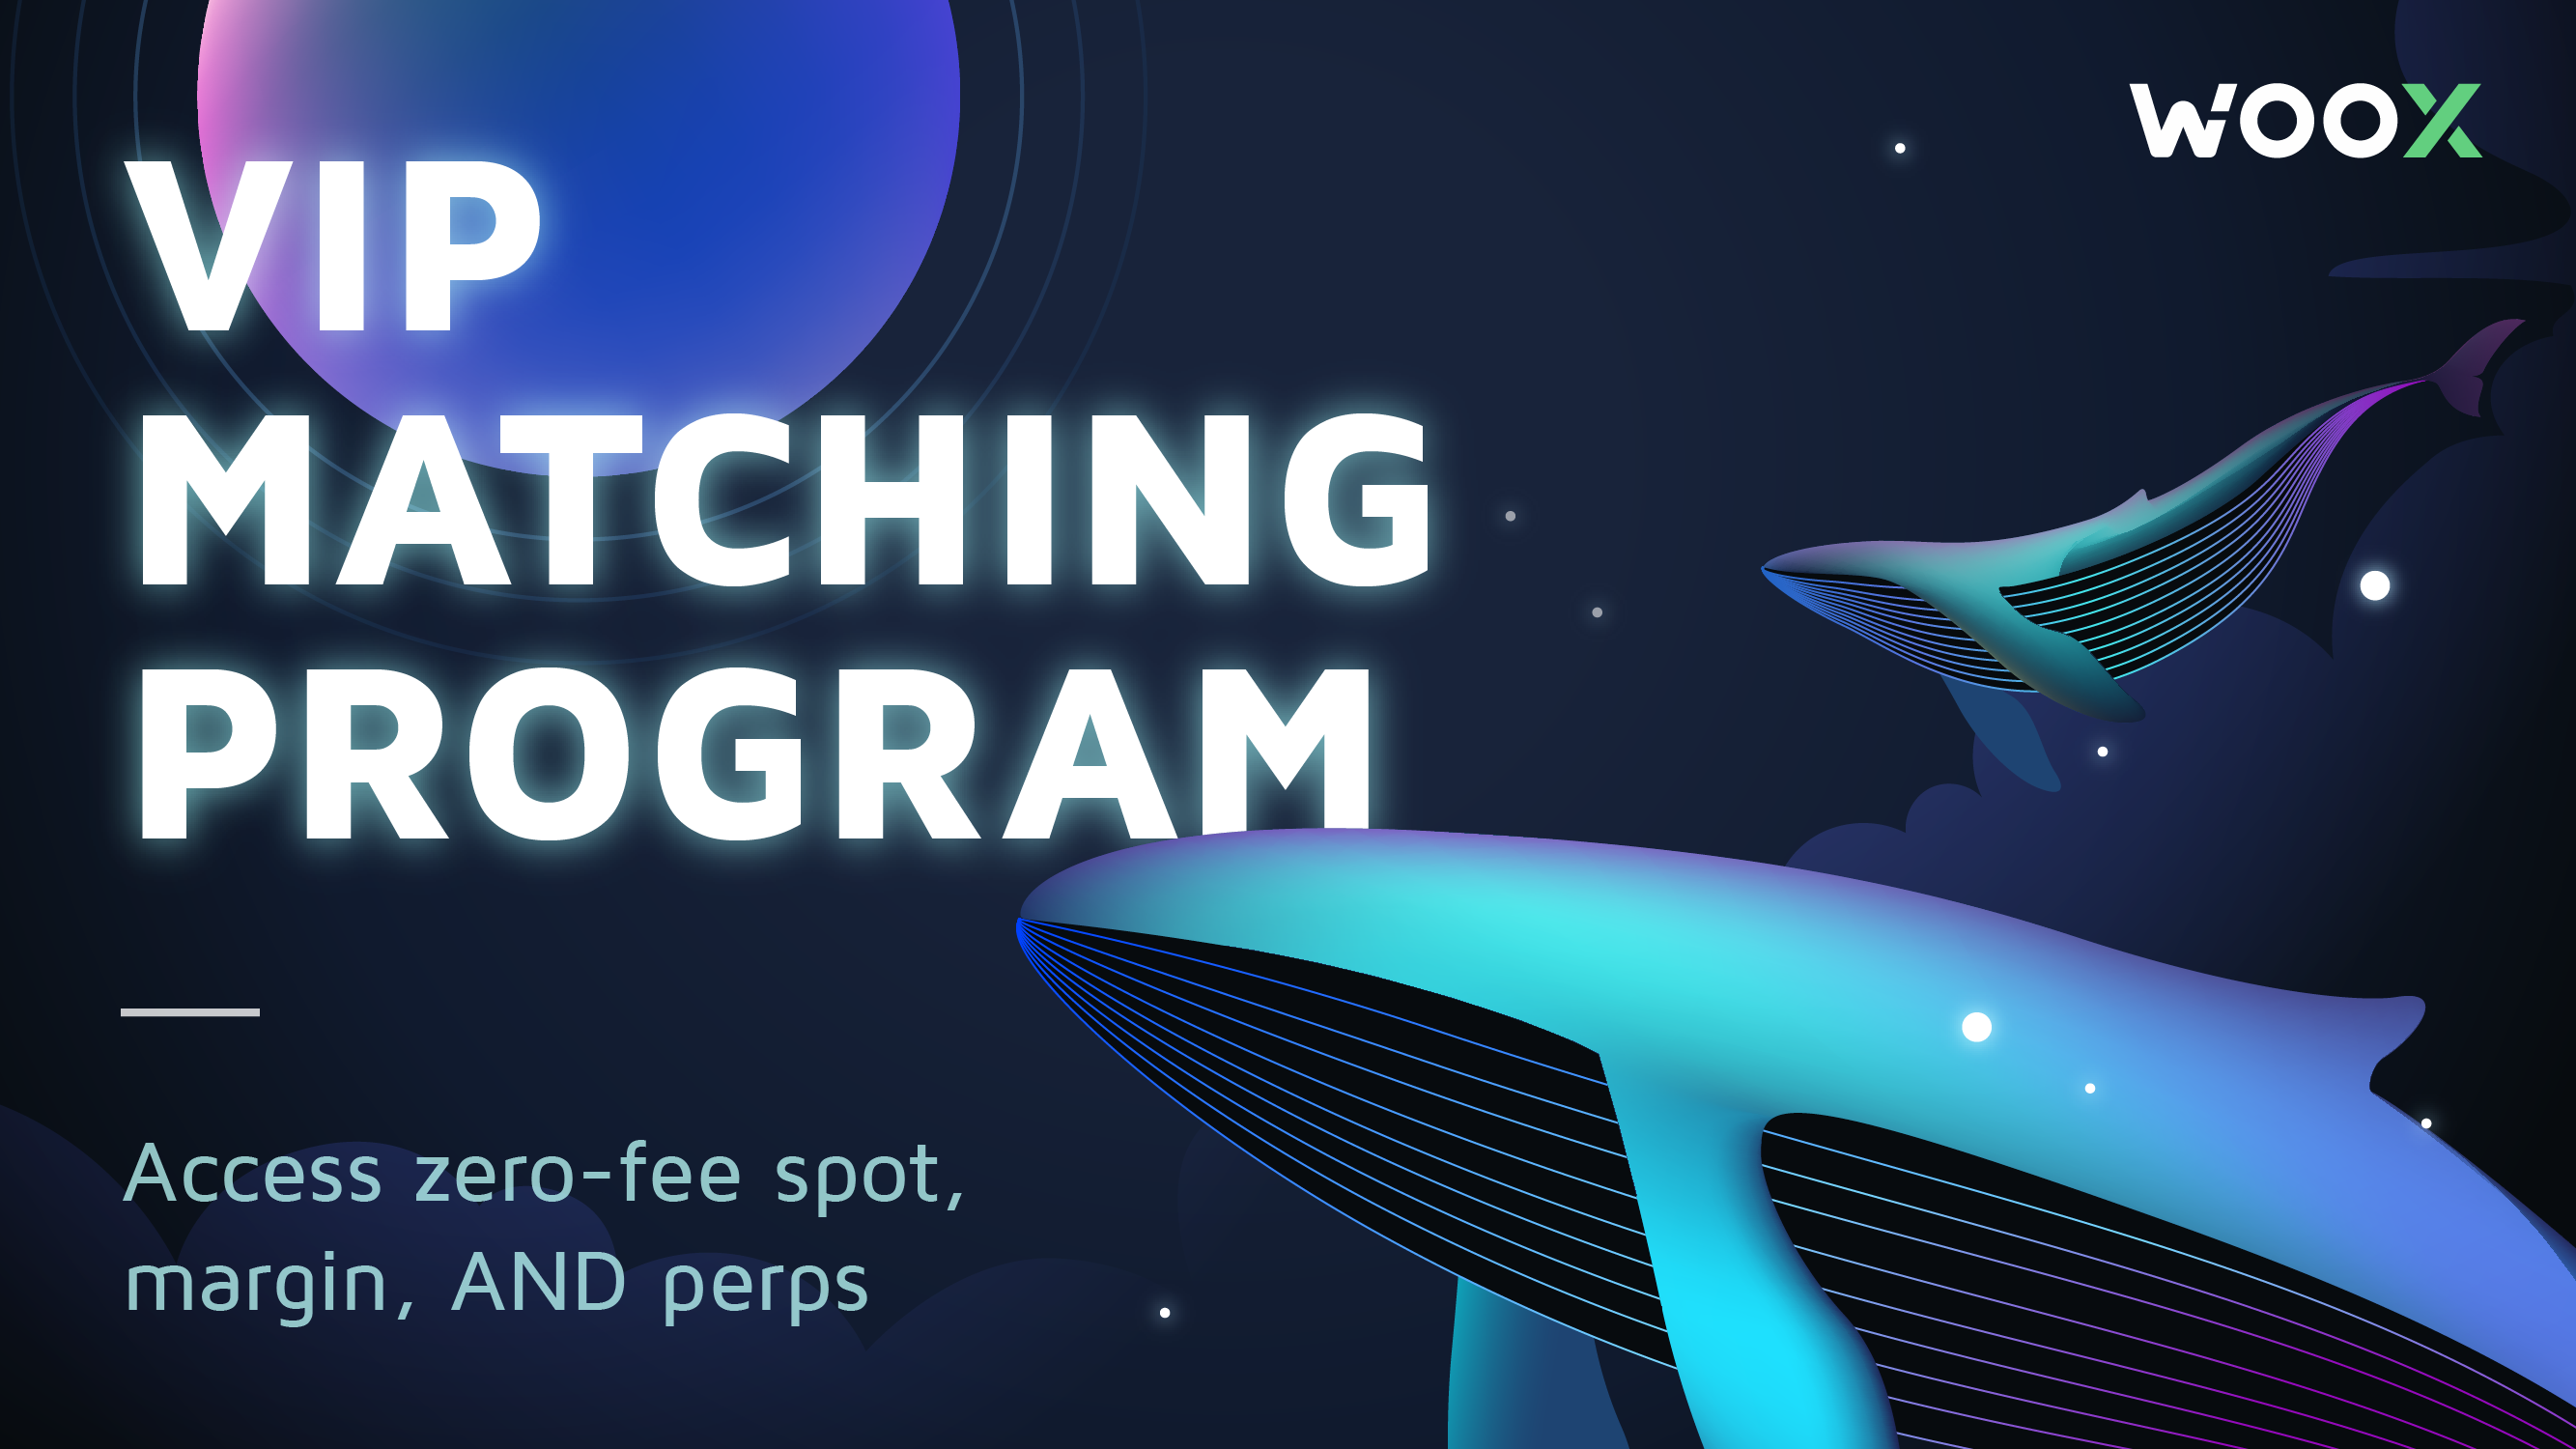 Join the Zero-fee Revolution with WOO X VIP Matching Program